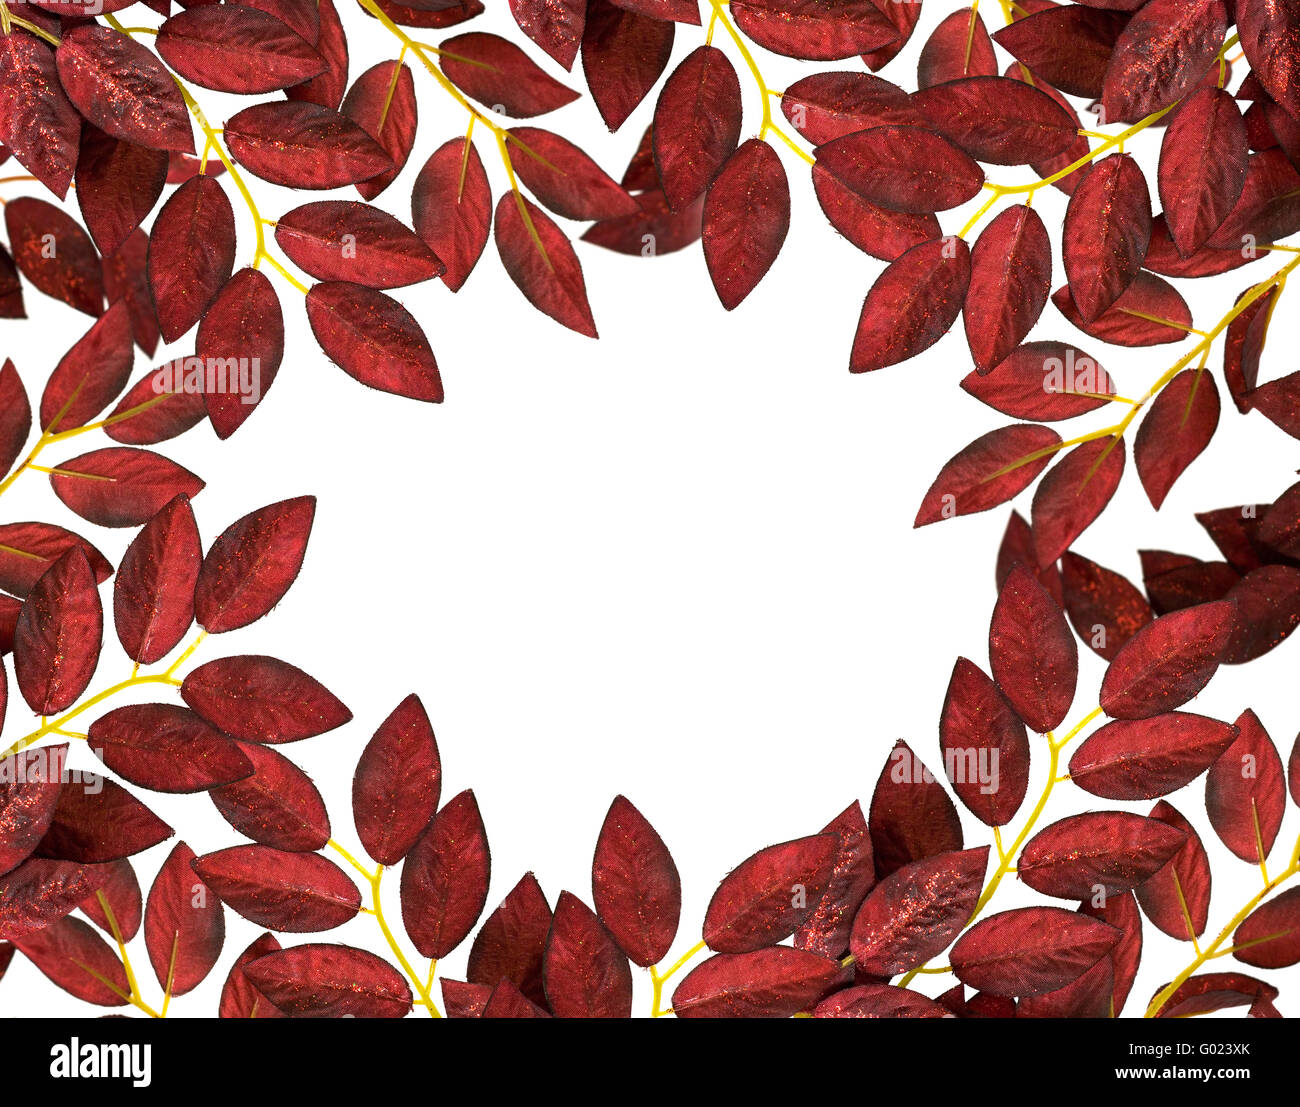 border of red leaves isolated on white background Stock Photo